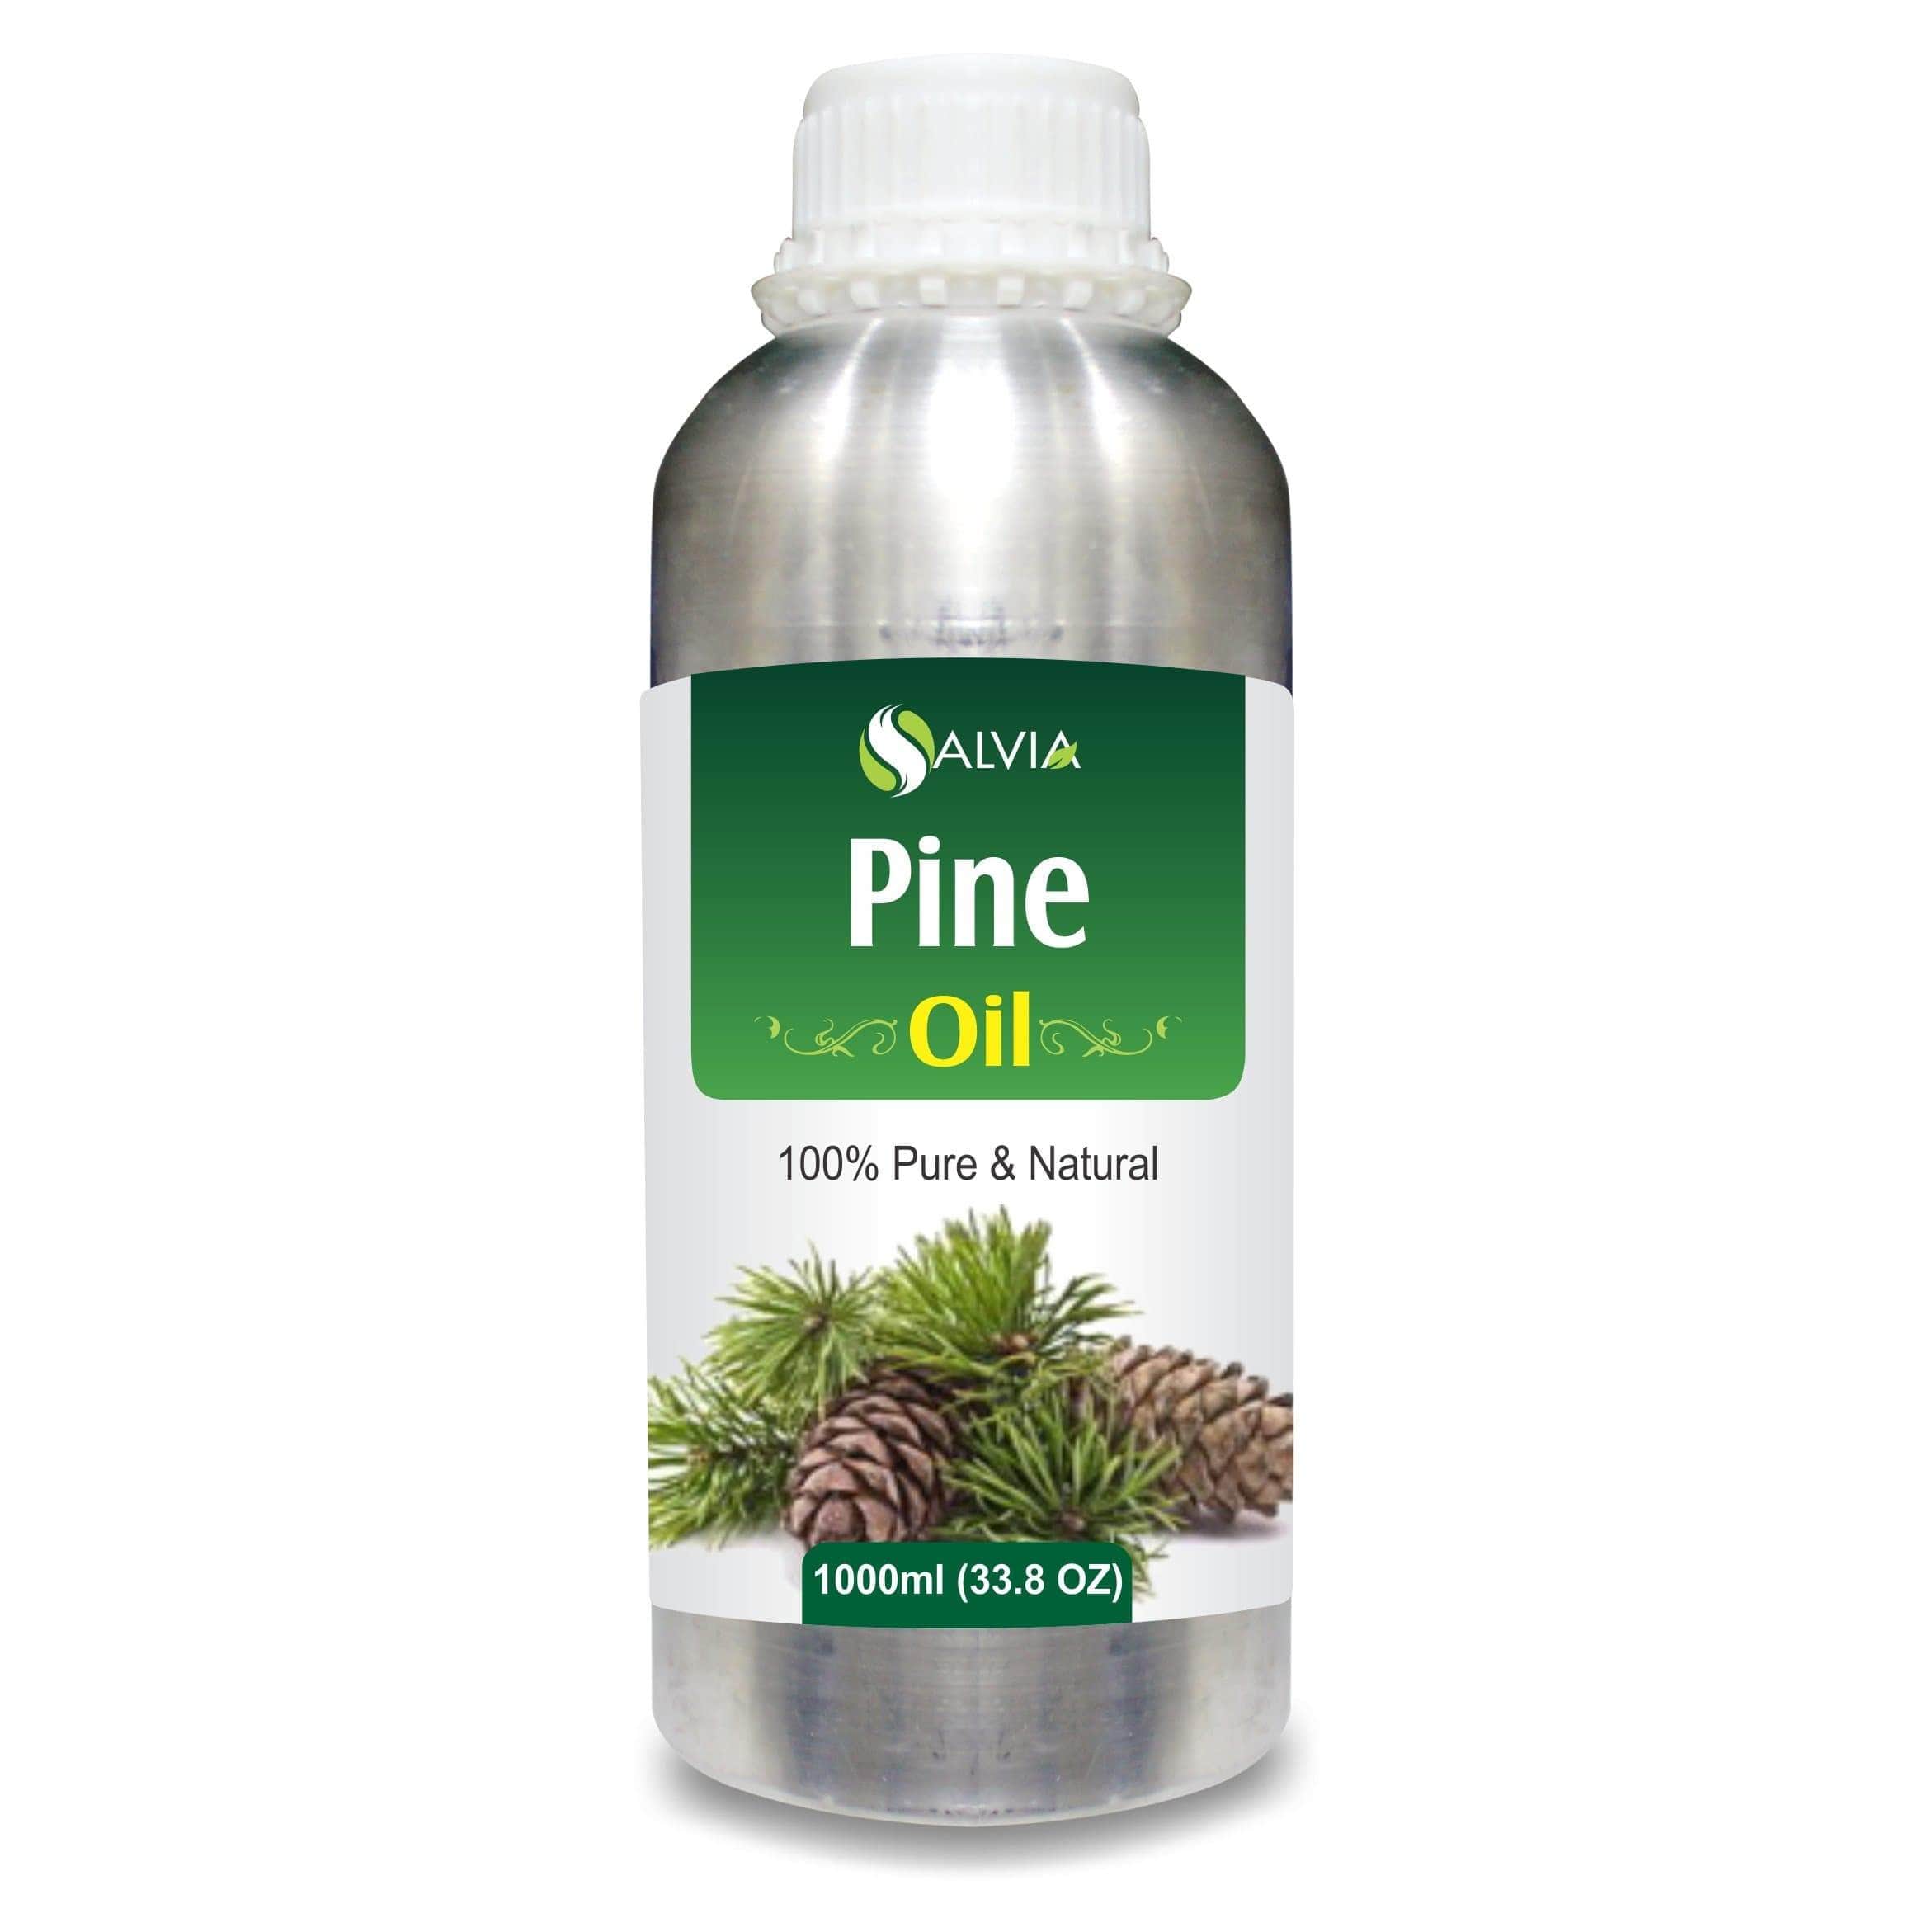 where to buy pine oil